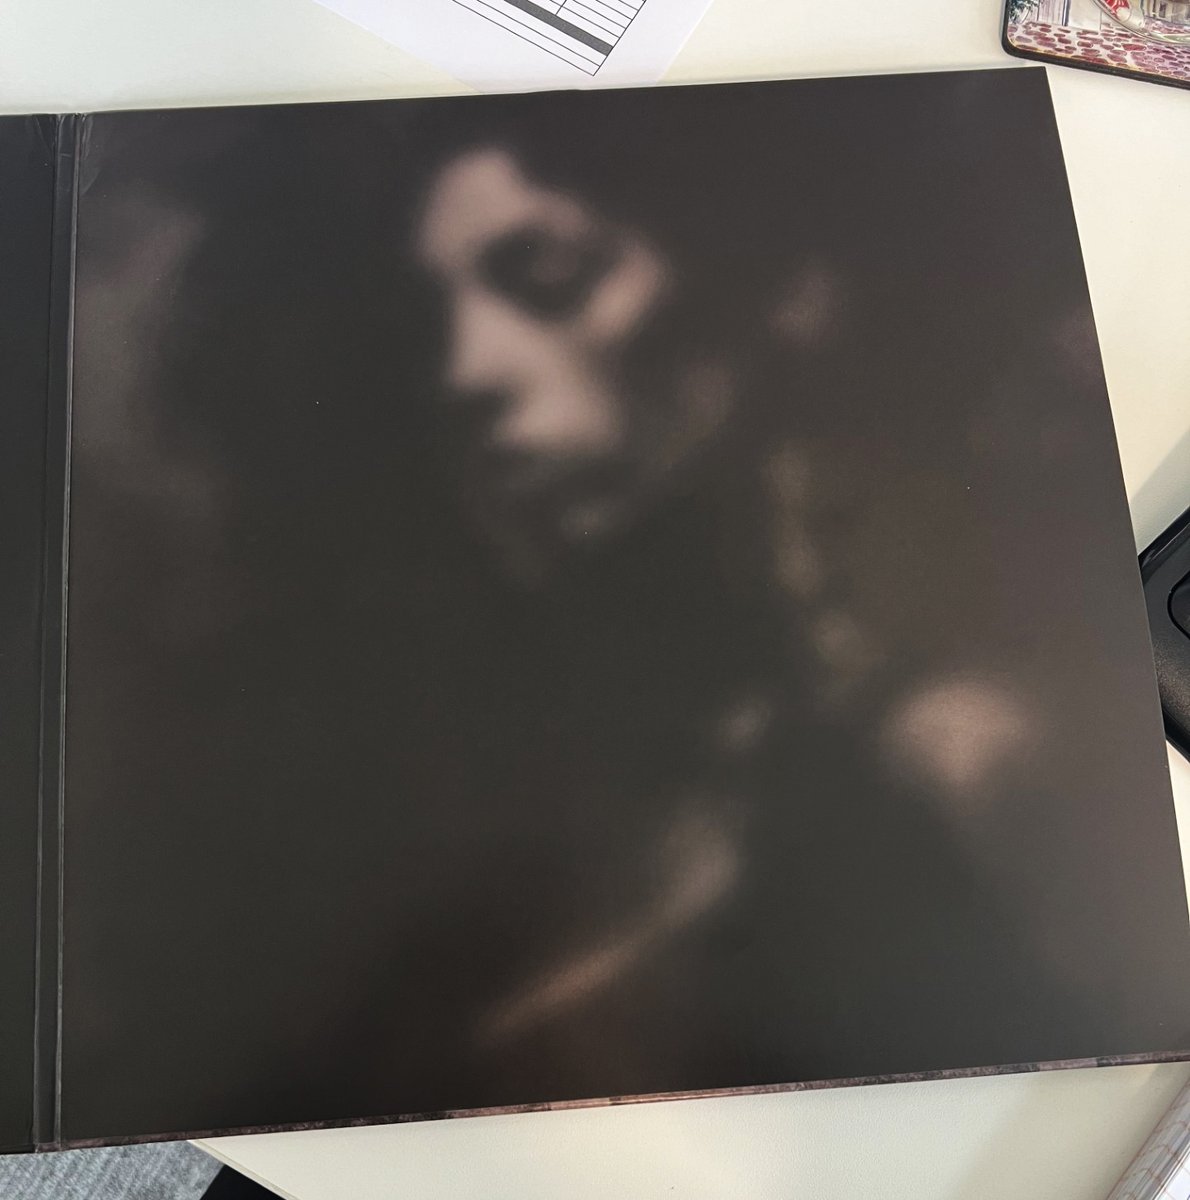 Kevin Richard Martin - 'Black' LP has just arrived at the @CargoRecords warehouse. A little reminder, that it drops in shops on May 17th... 📷📷